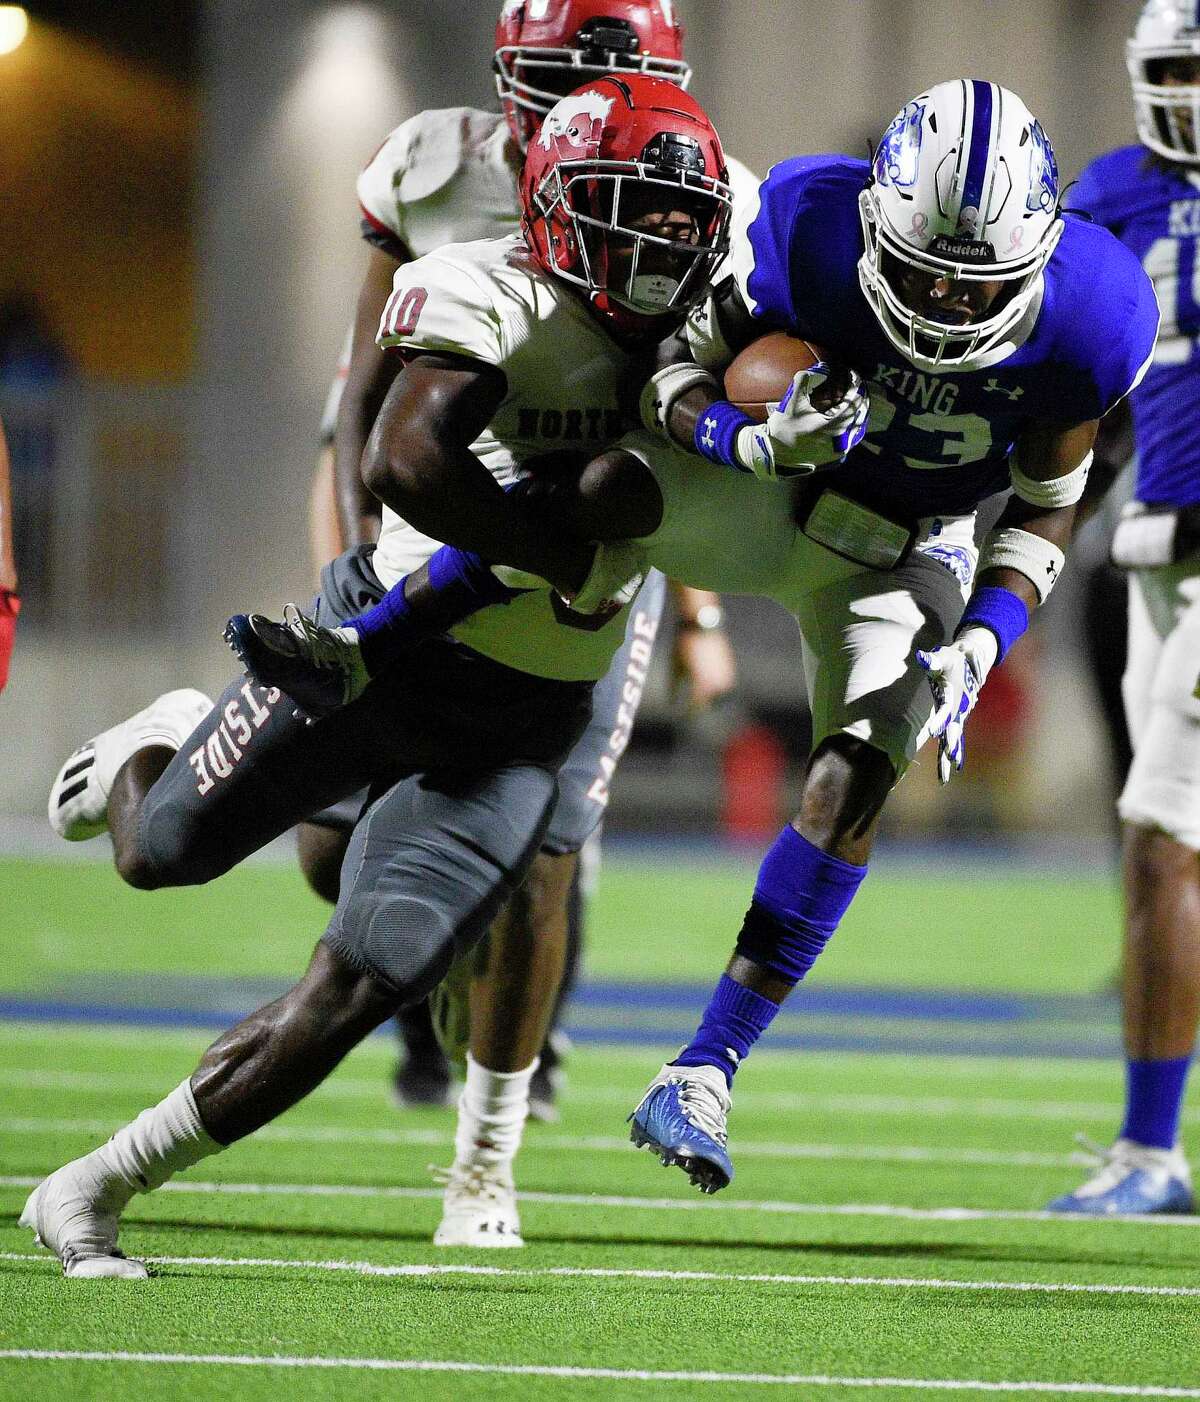 C.E. King running back DK Hammond, right, is tackled for a loss by North Shore linebacker Kent Battle during the first half of a high school football game, Friday, Oct. 22, 2021, in Houston.